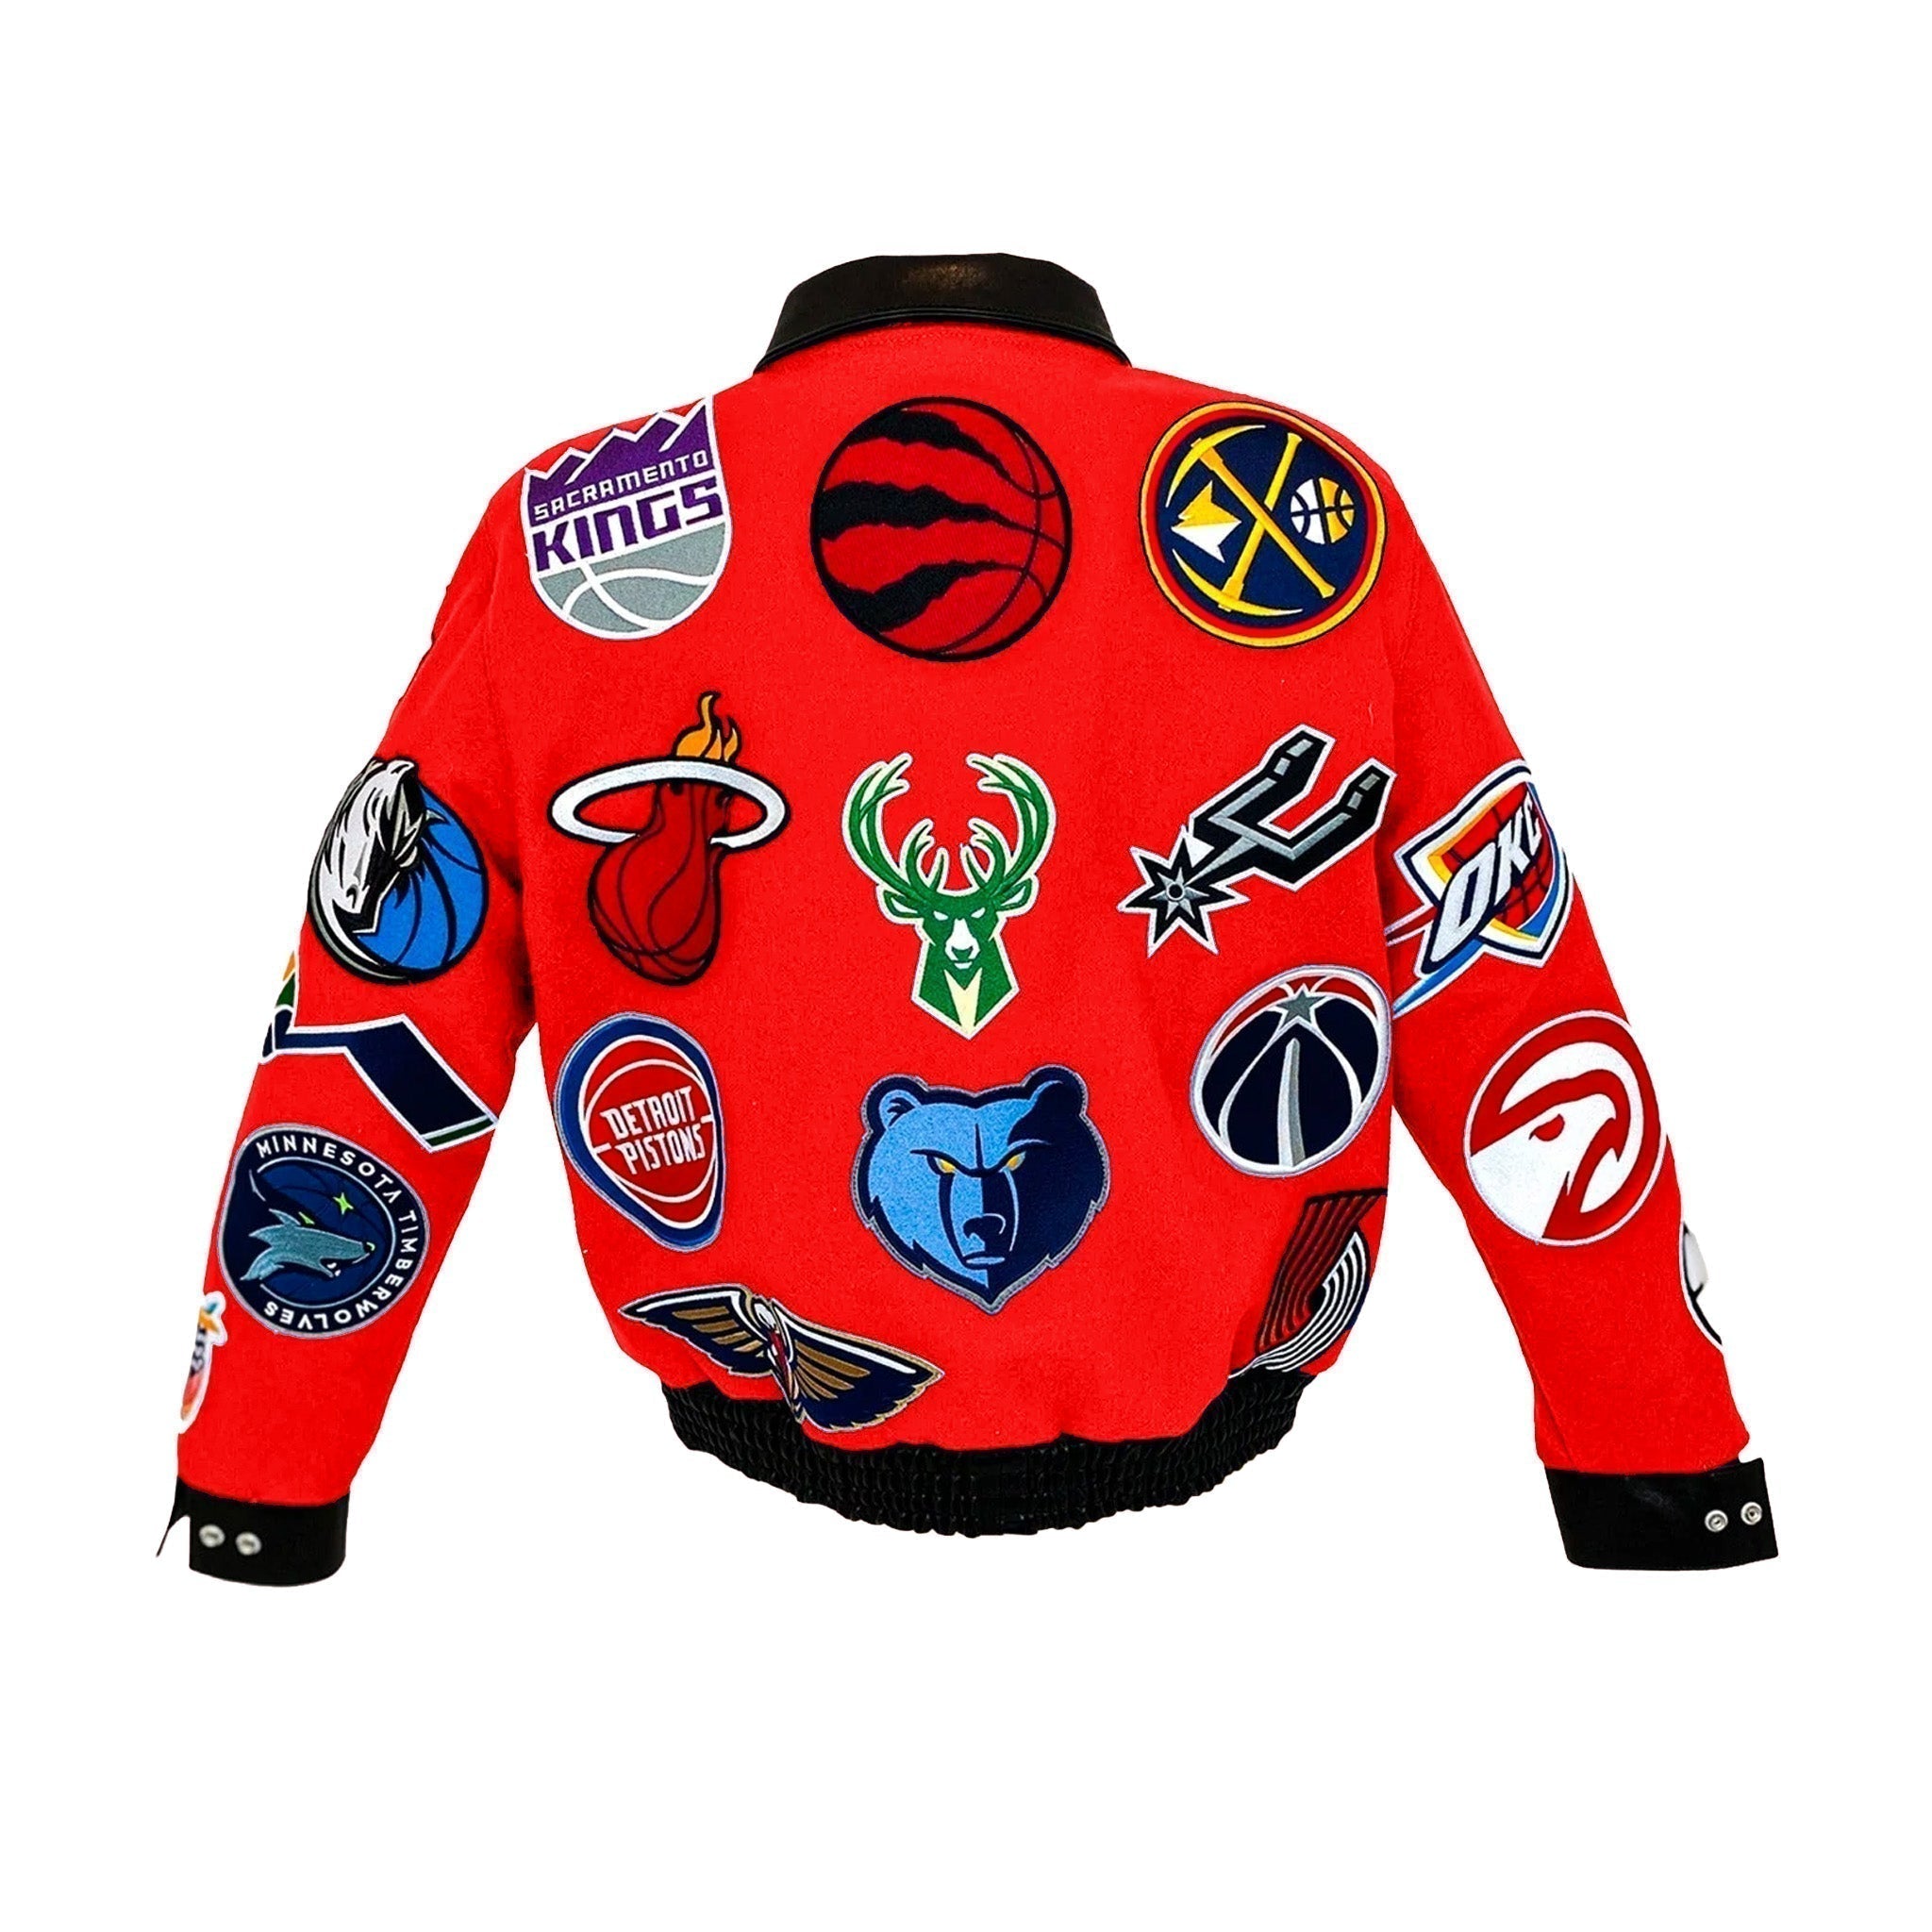 NBA Collage Wool & Leather Jacket Red